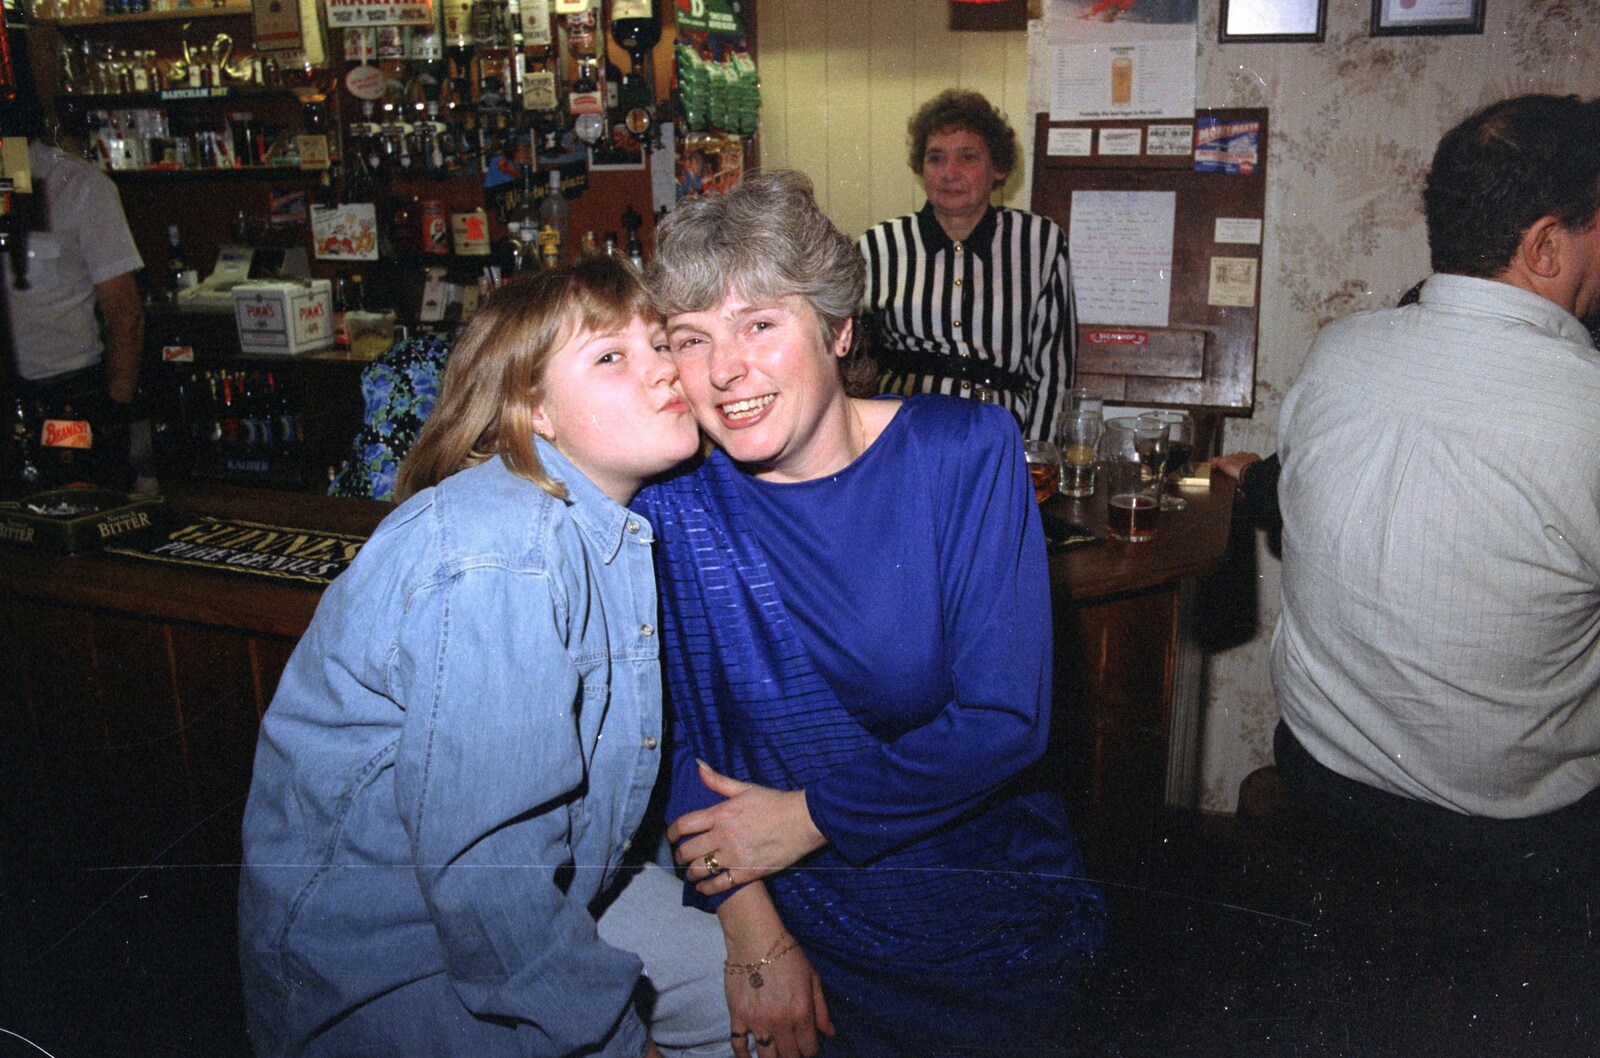 Helen and Spammy from New Year's Eve at the Swan Inn, Brome, Suffolk - 31st December 1991